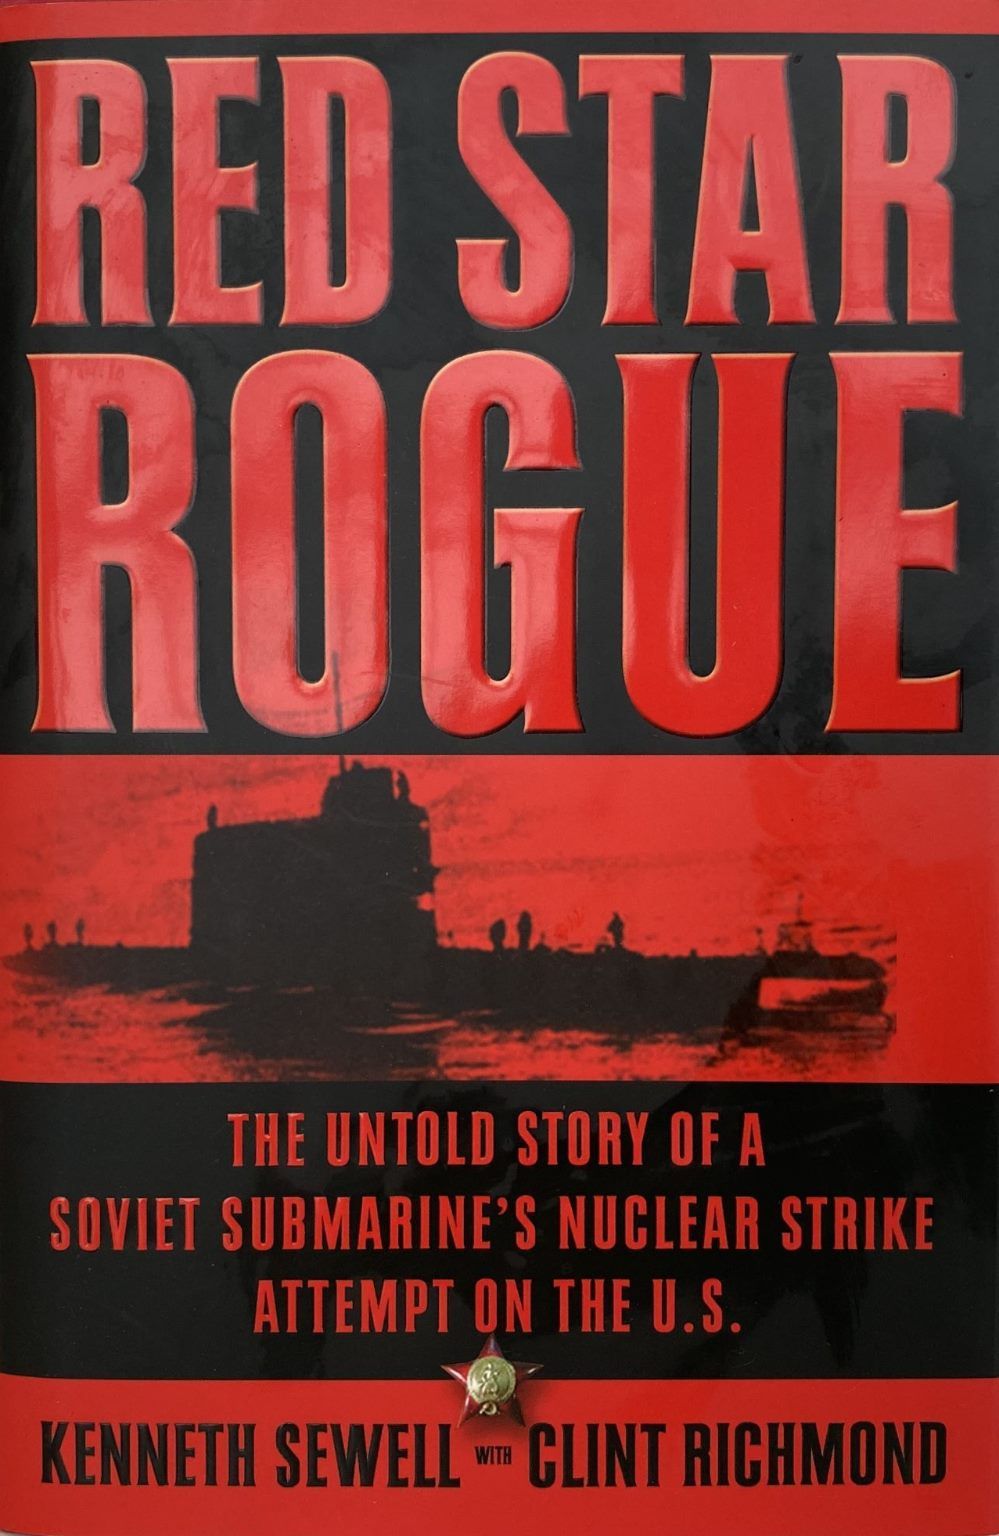 RED STAR ROUGE: The Story of a Soviet Submarine's Nuclear strike attempt